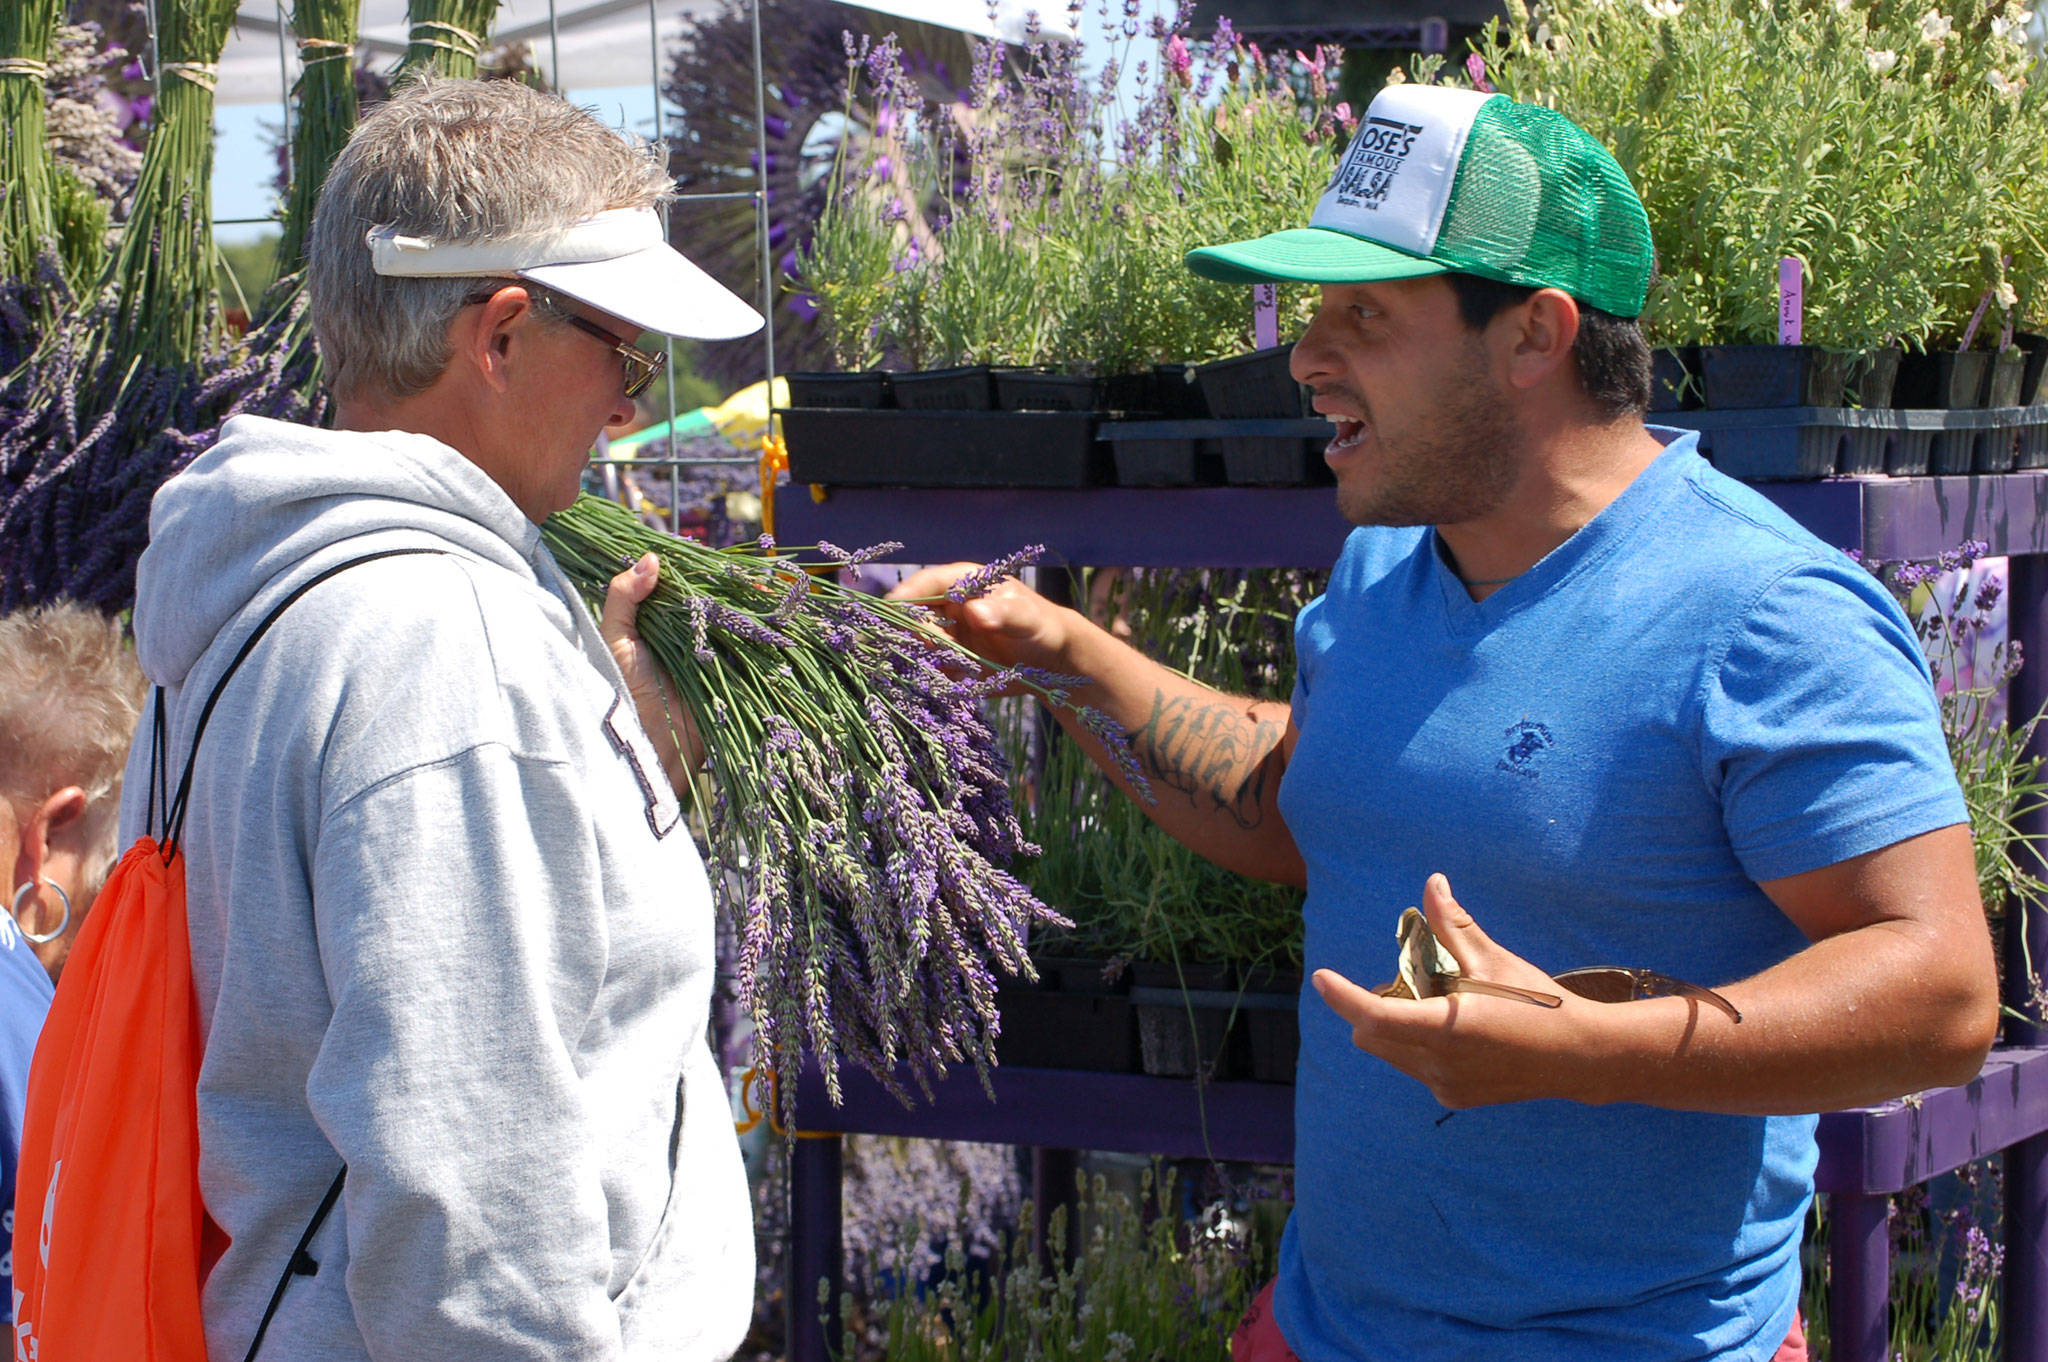 Loretta Spencer from Hoodsport chats with Juan Gonzalez of Meli’s Lavender Farm about lavender at the Sequim Lavender Festival Street Fair at Carrie Blake Park. (Erin Hawkins/Olympic Peninsula News Group)